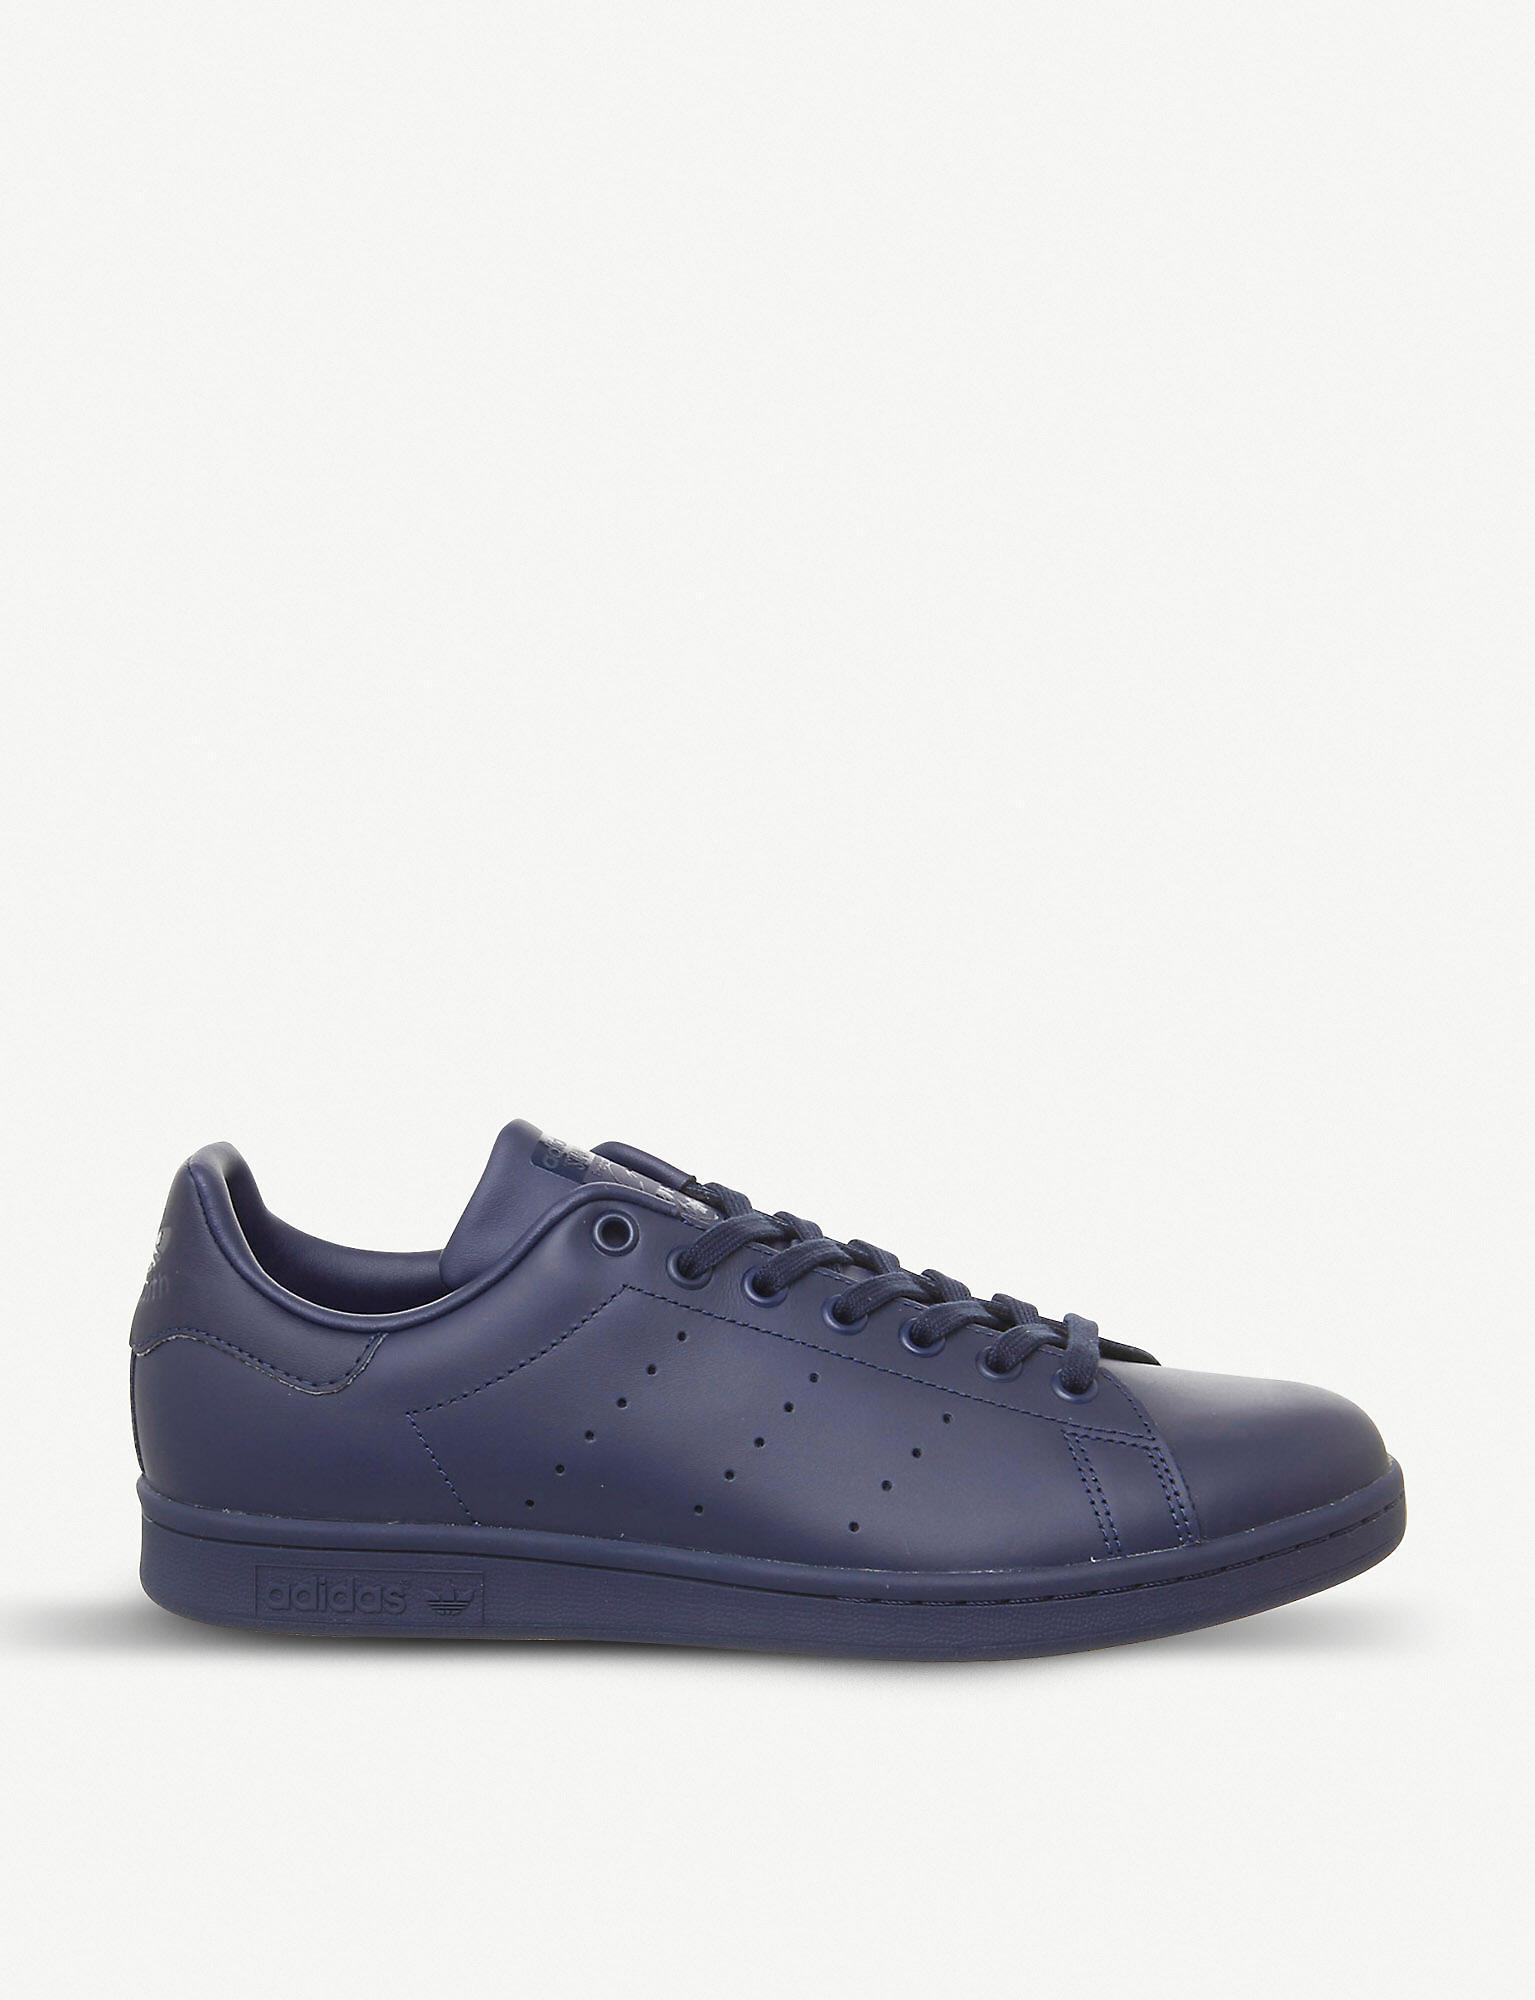 adidas Stan Smith Leather Mono - 6.5 Uk in Blue for | Lyst